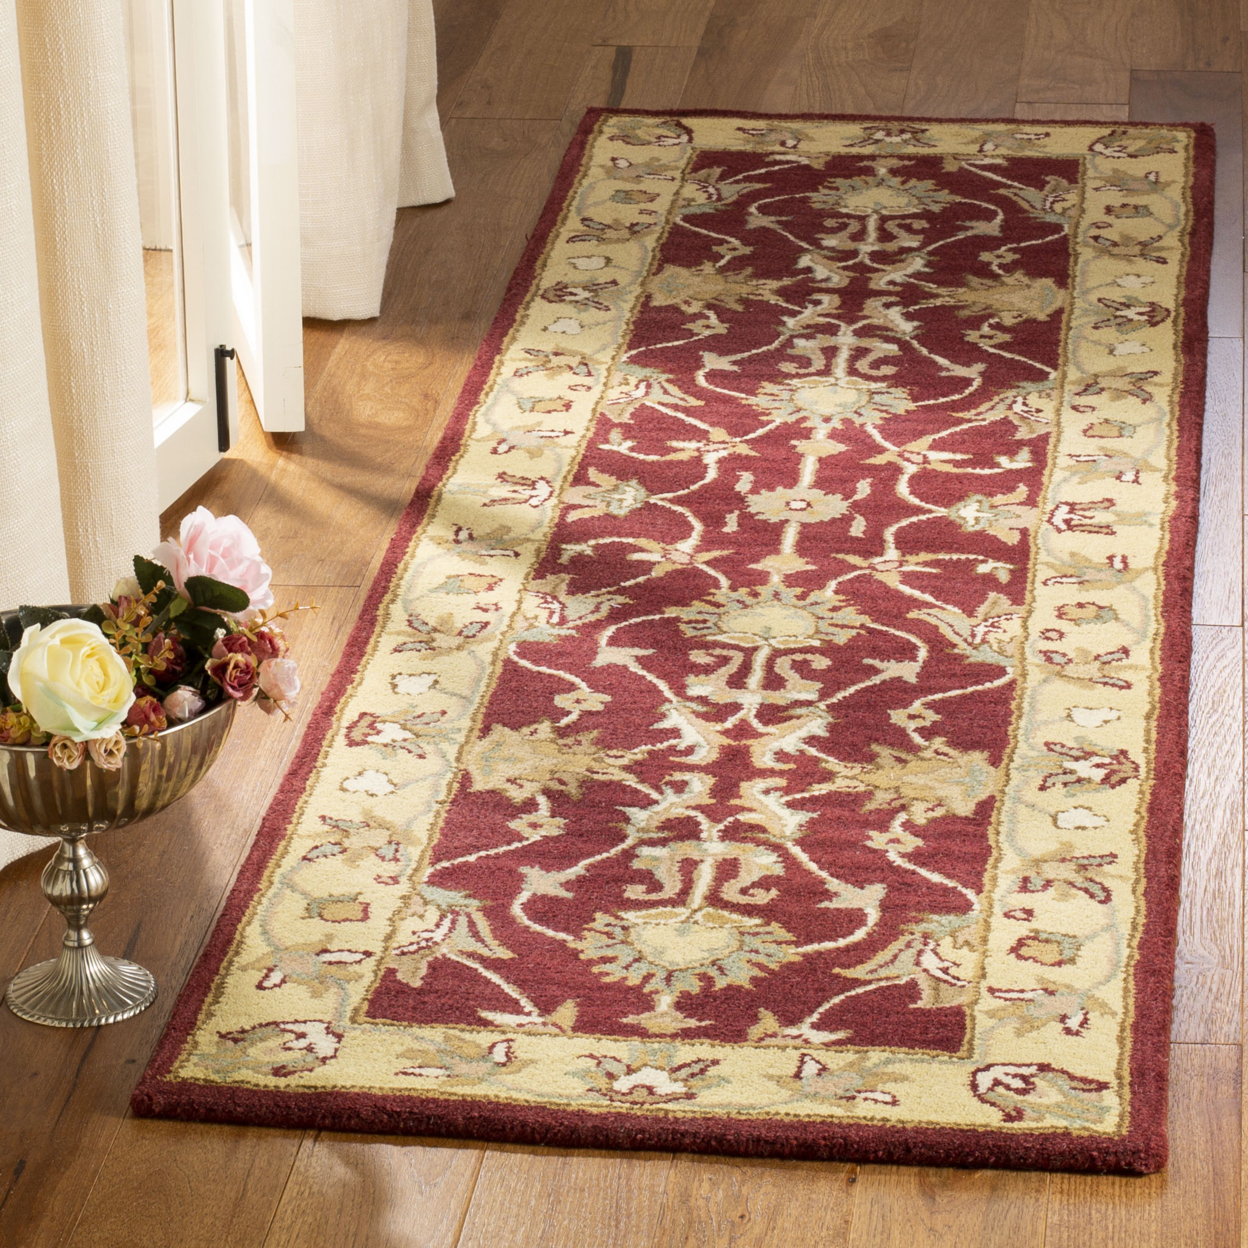 SAFAVIEH Heritage Regis Traditional Wool Area Rug, Red/Gold, 5' x 8' - image 3 of 10